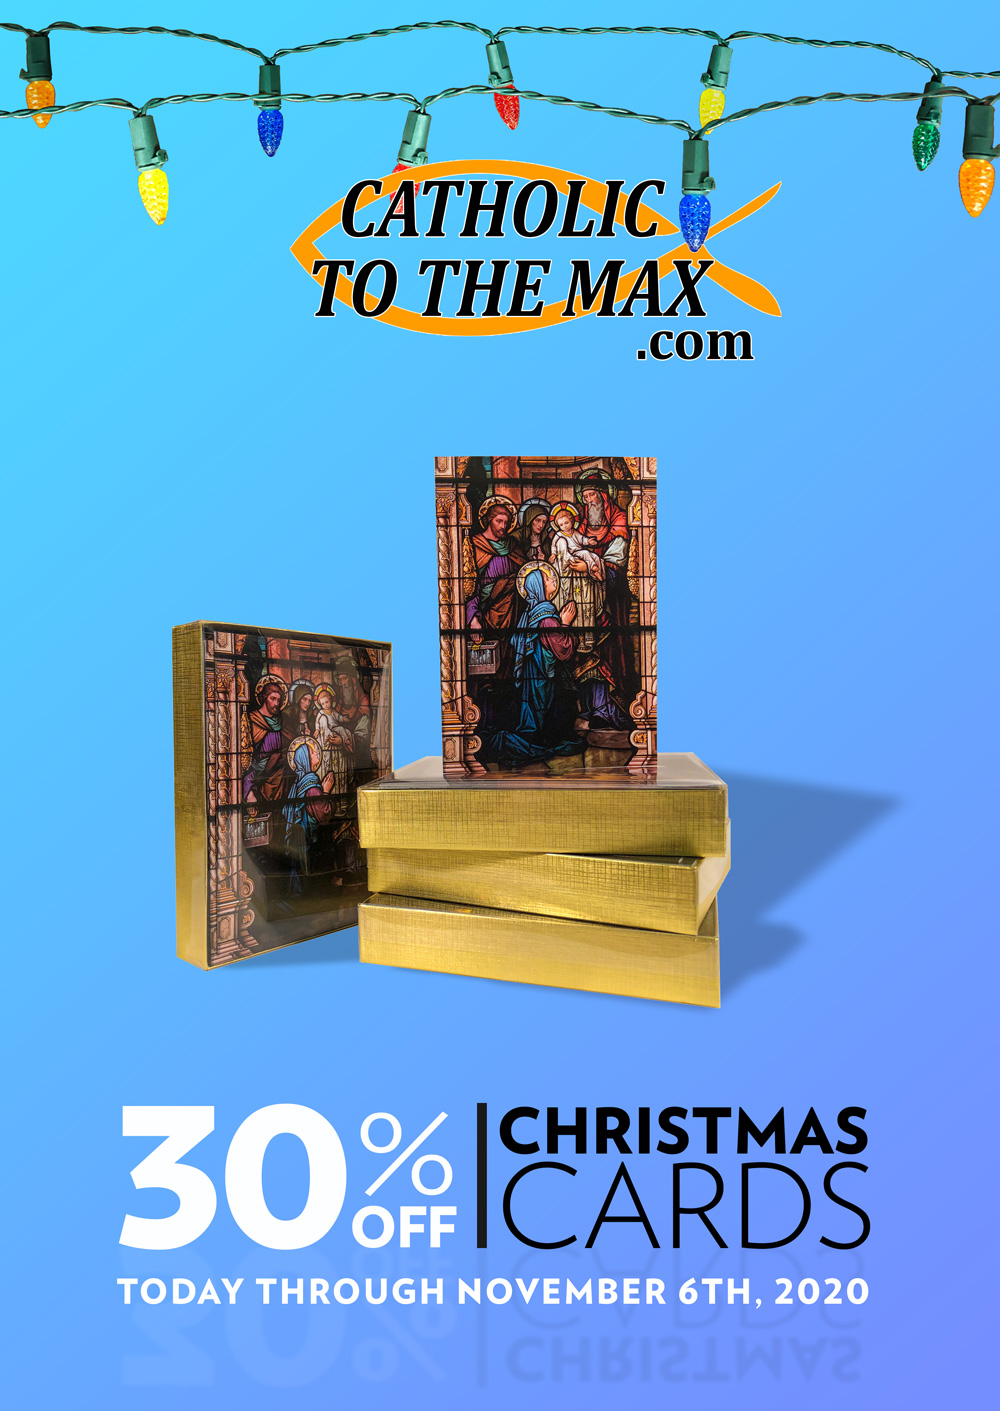 30% off all Christmas Cards. Today through November 6th, 2020